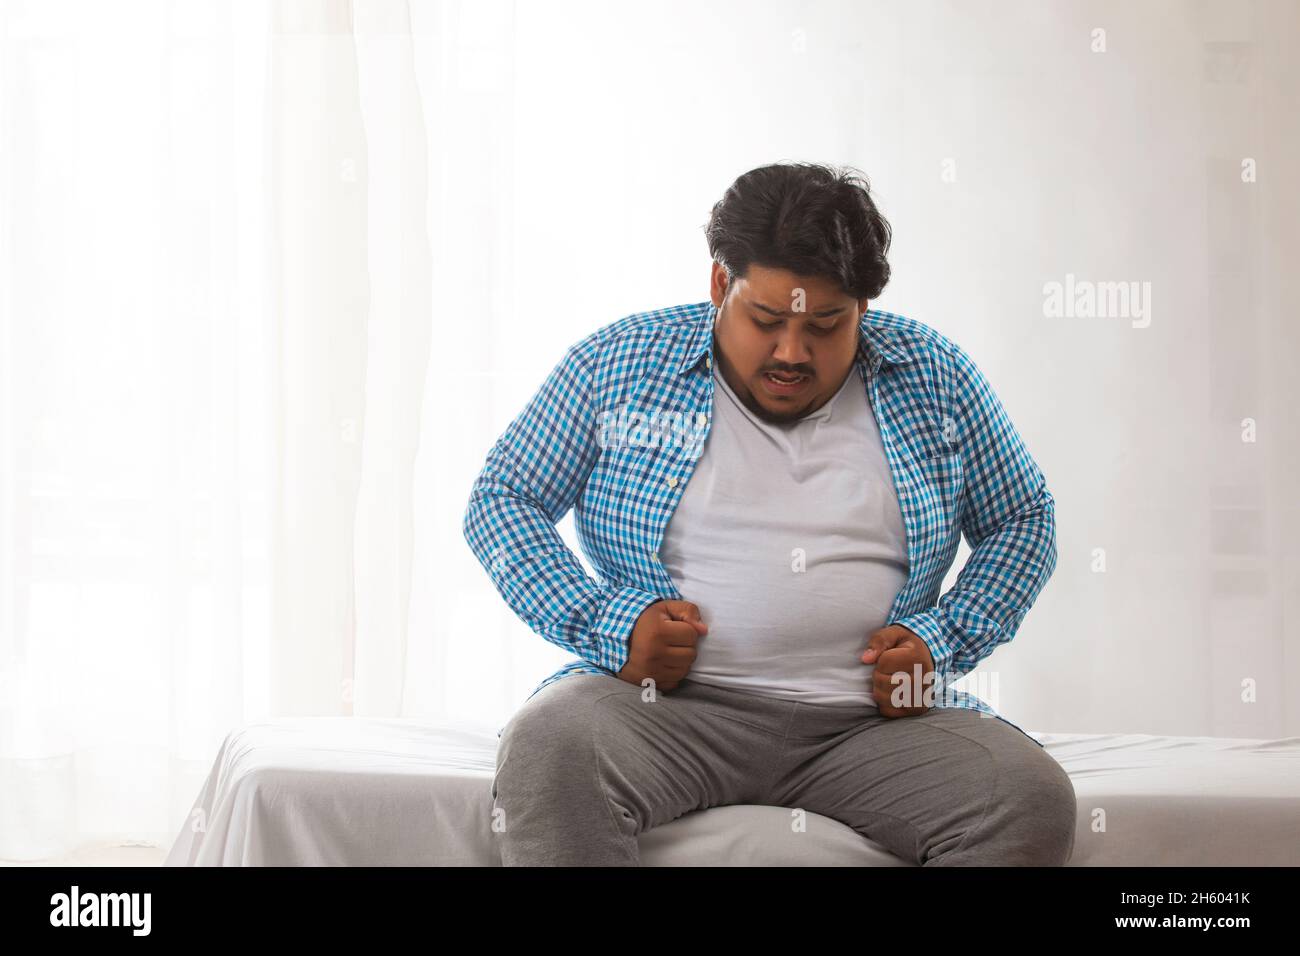 A fat man sitting and trying to wear his shirt. Stock Photo